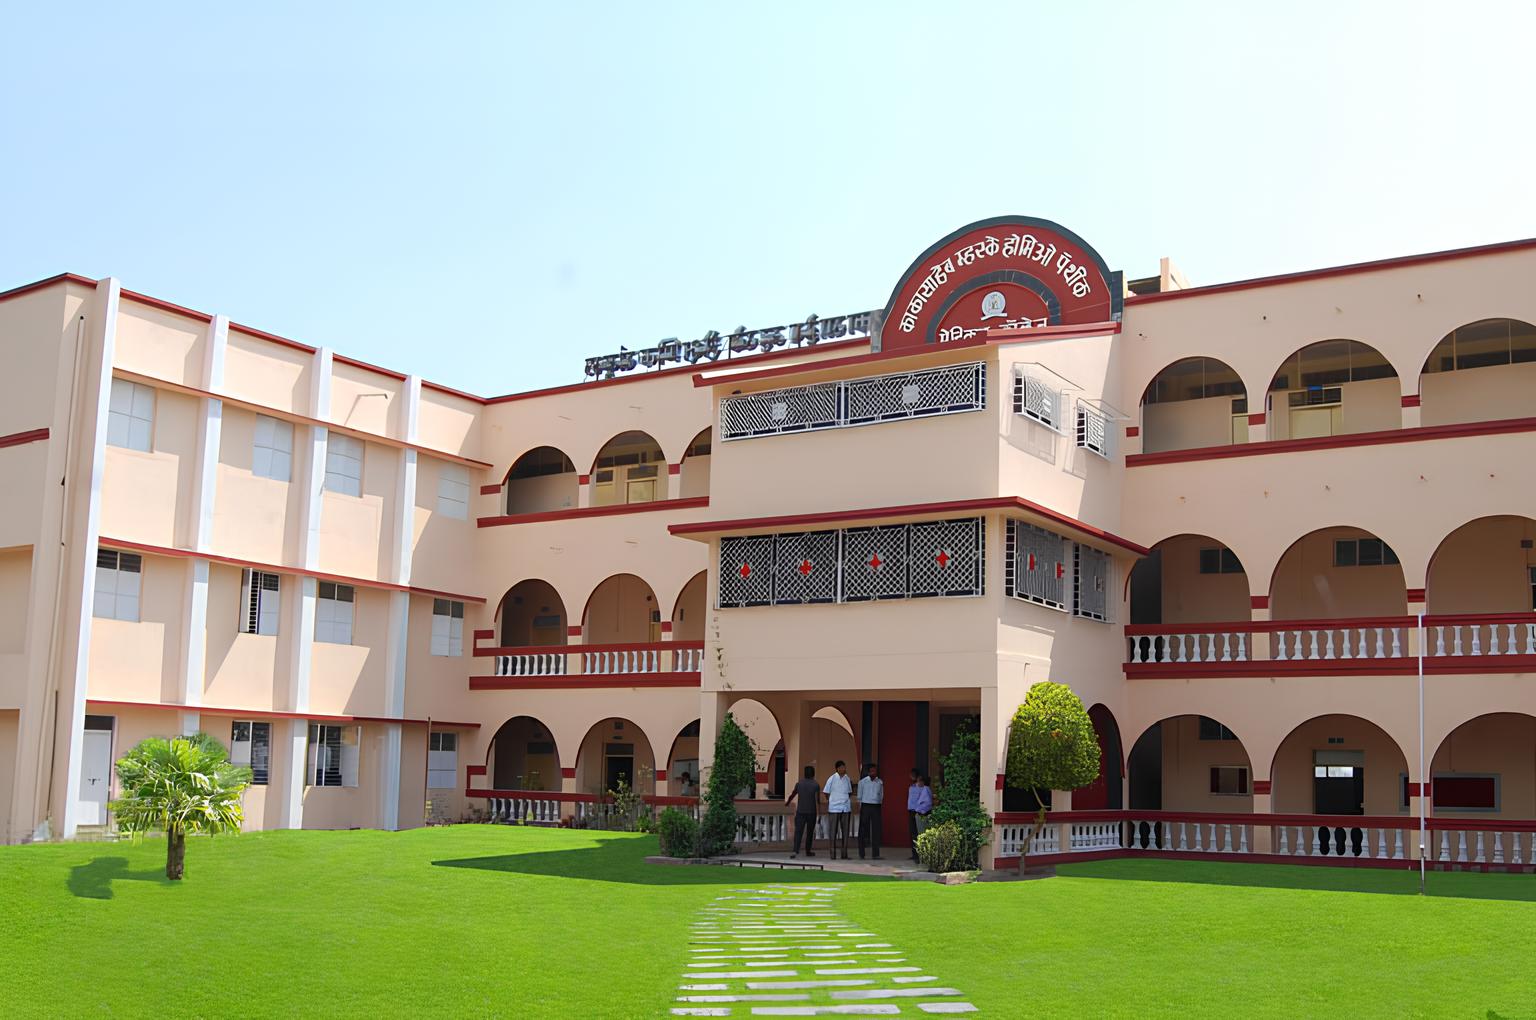 Kakasaheb Mhaske Homoeopathic Medical College Ahmednagar Admission, Courses, Eligibility, Fees, Facilities